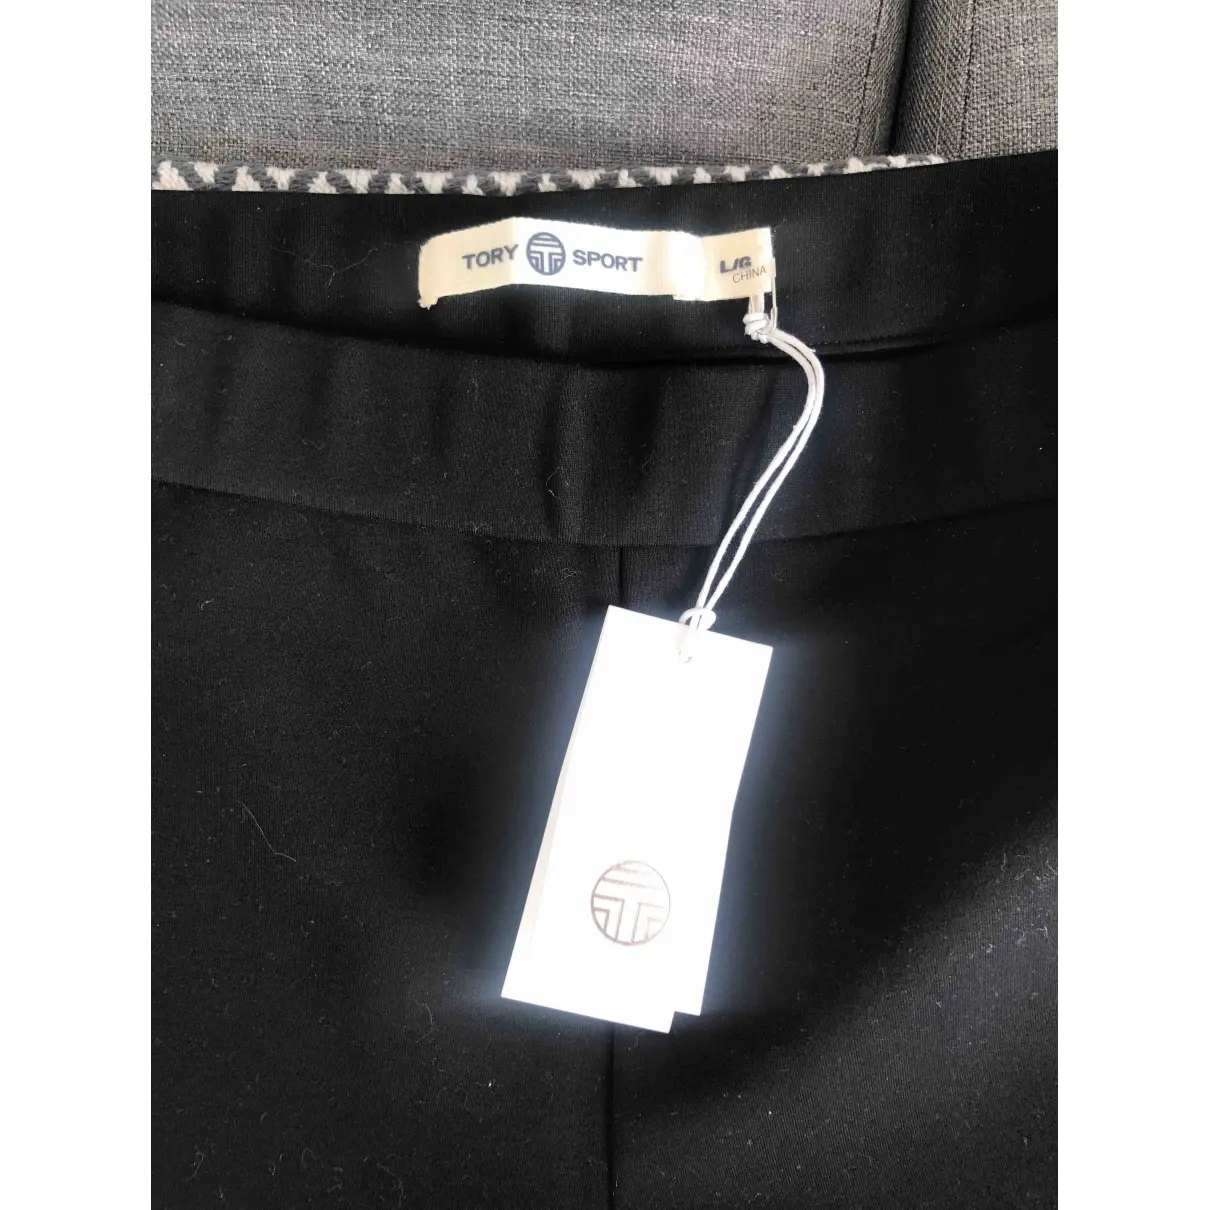 Buy Tory Sport Black Synthetic Trousers online